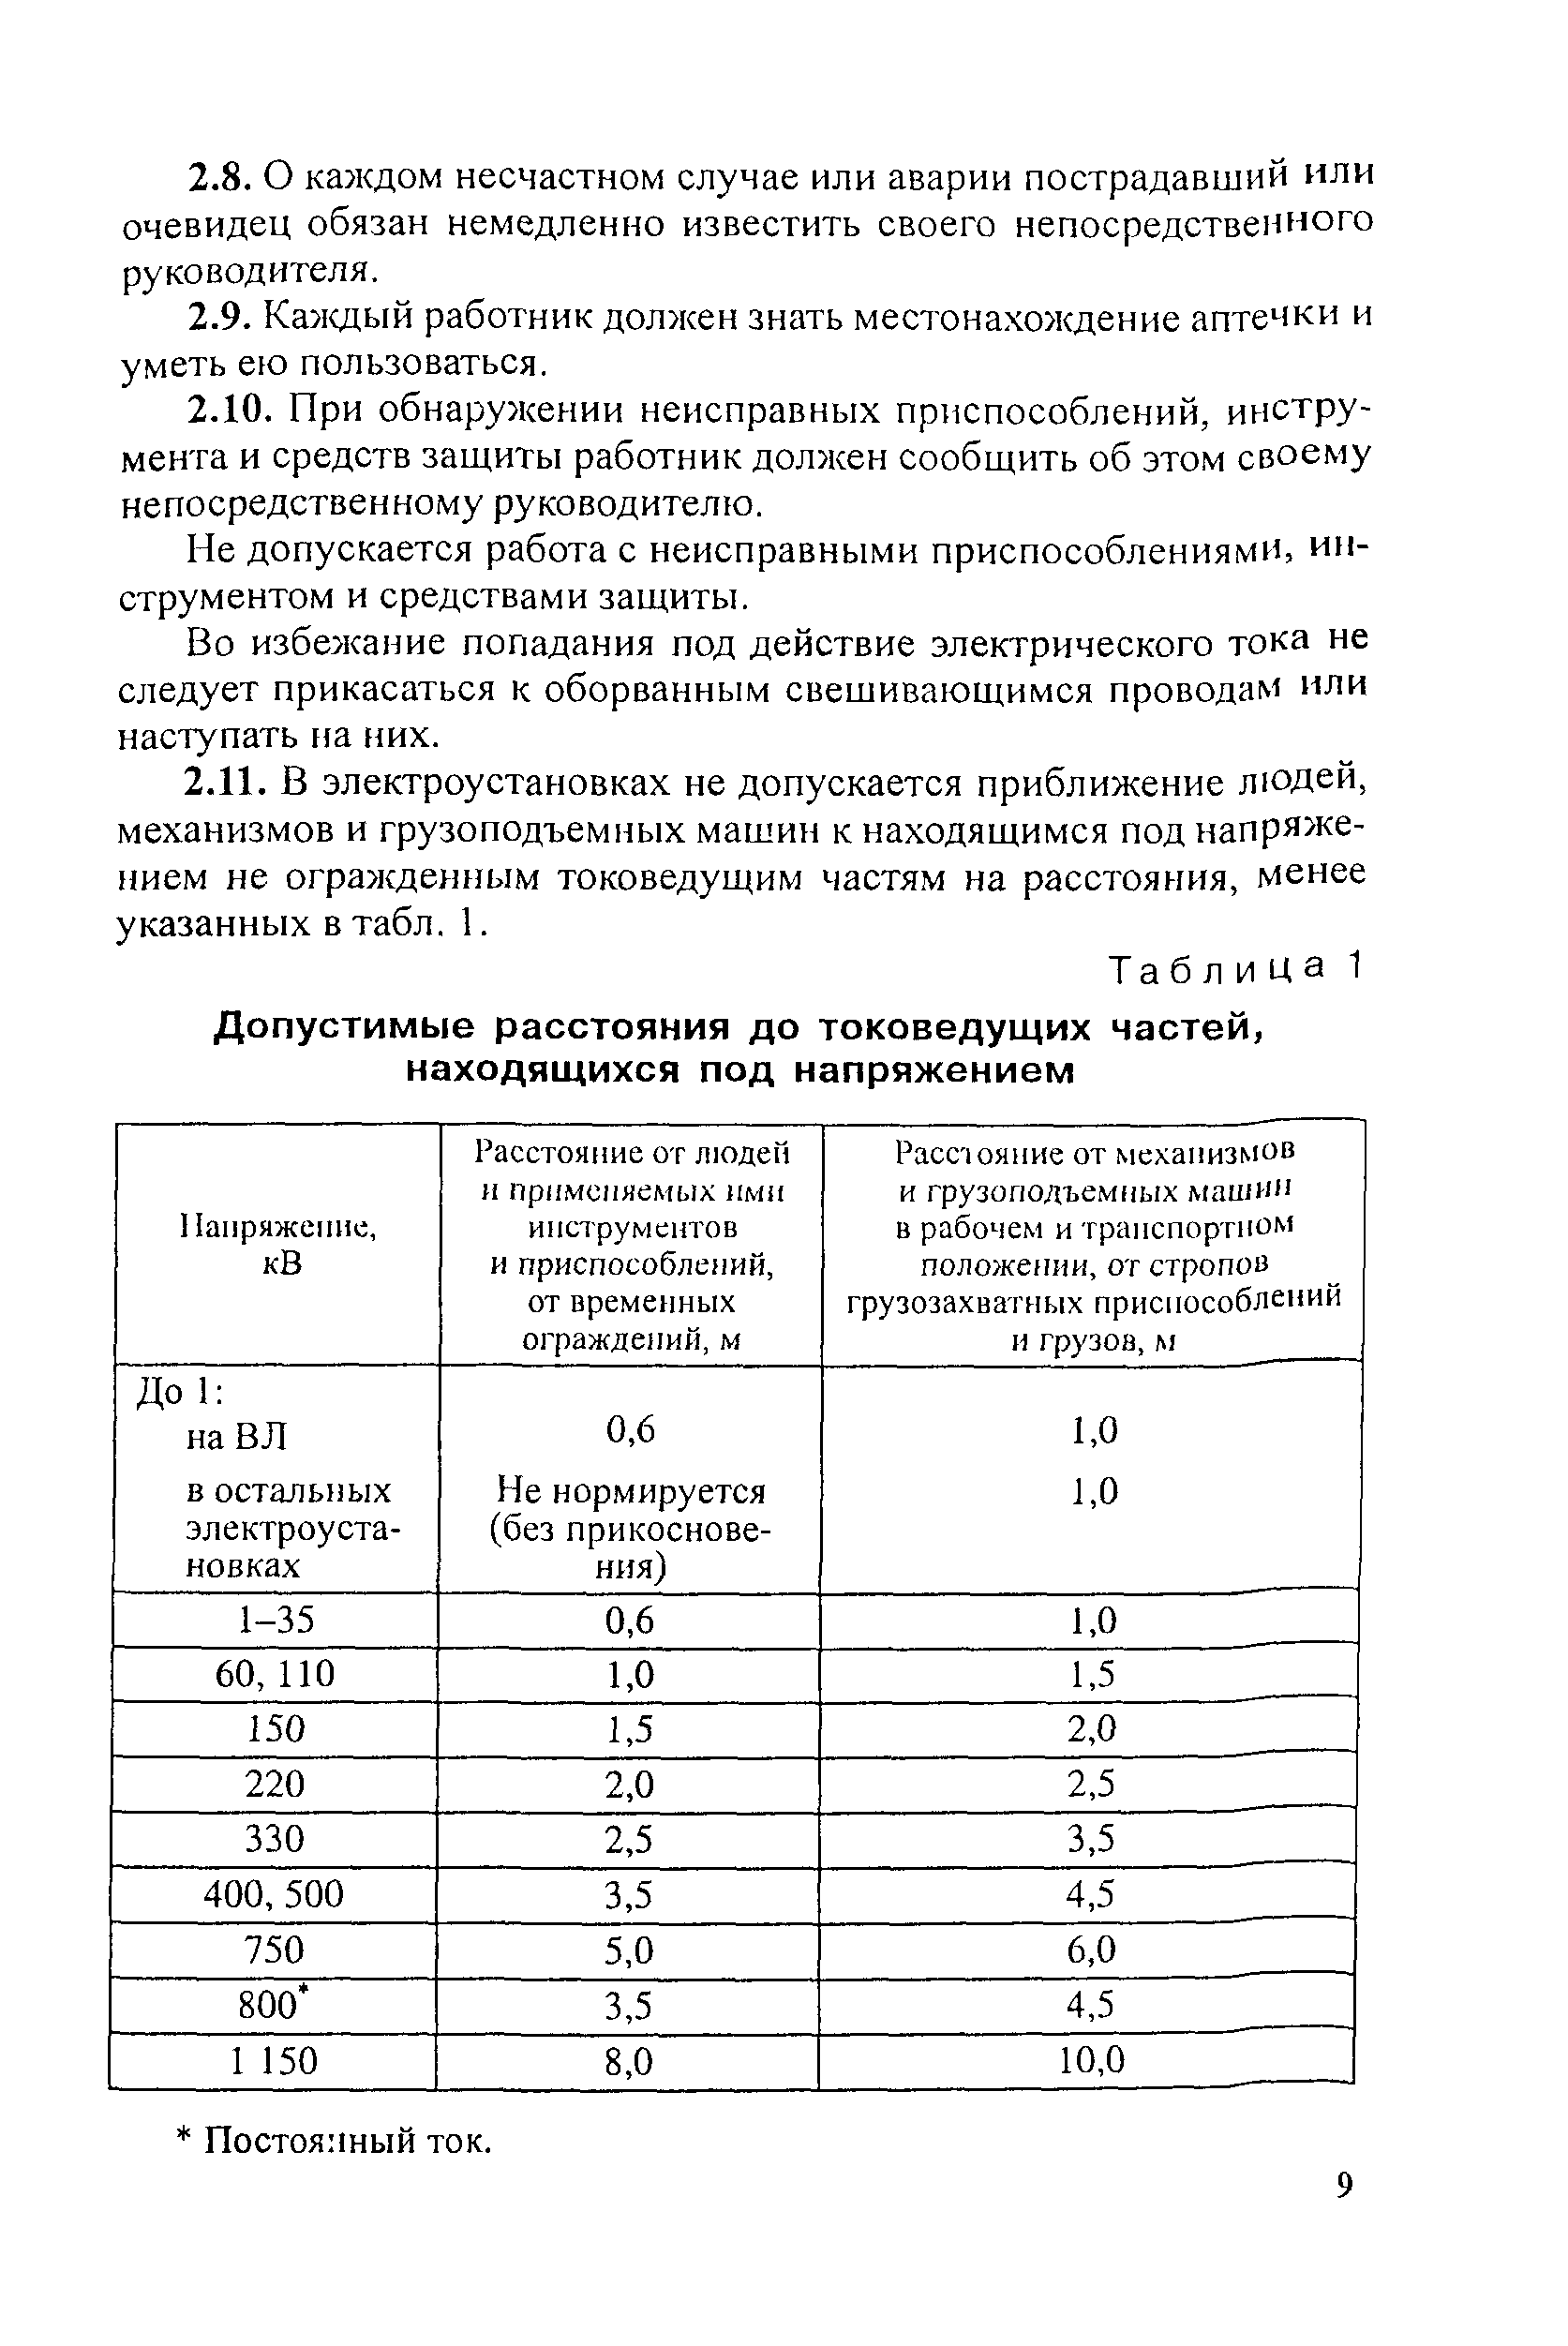 ТИ Р М-062-2002